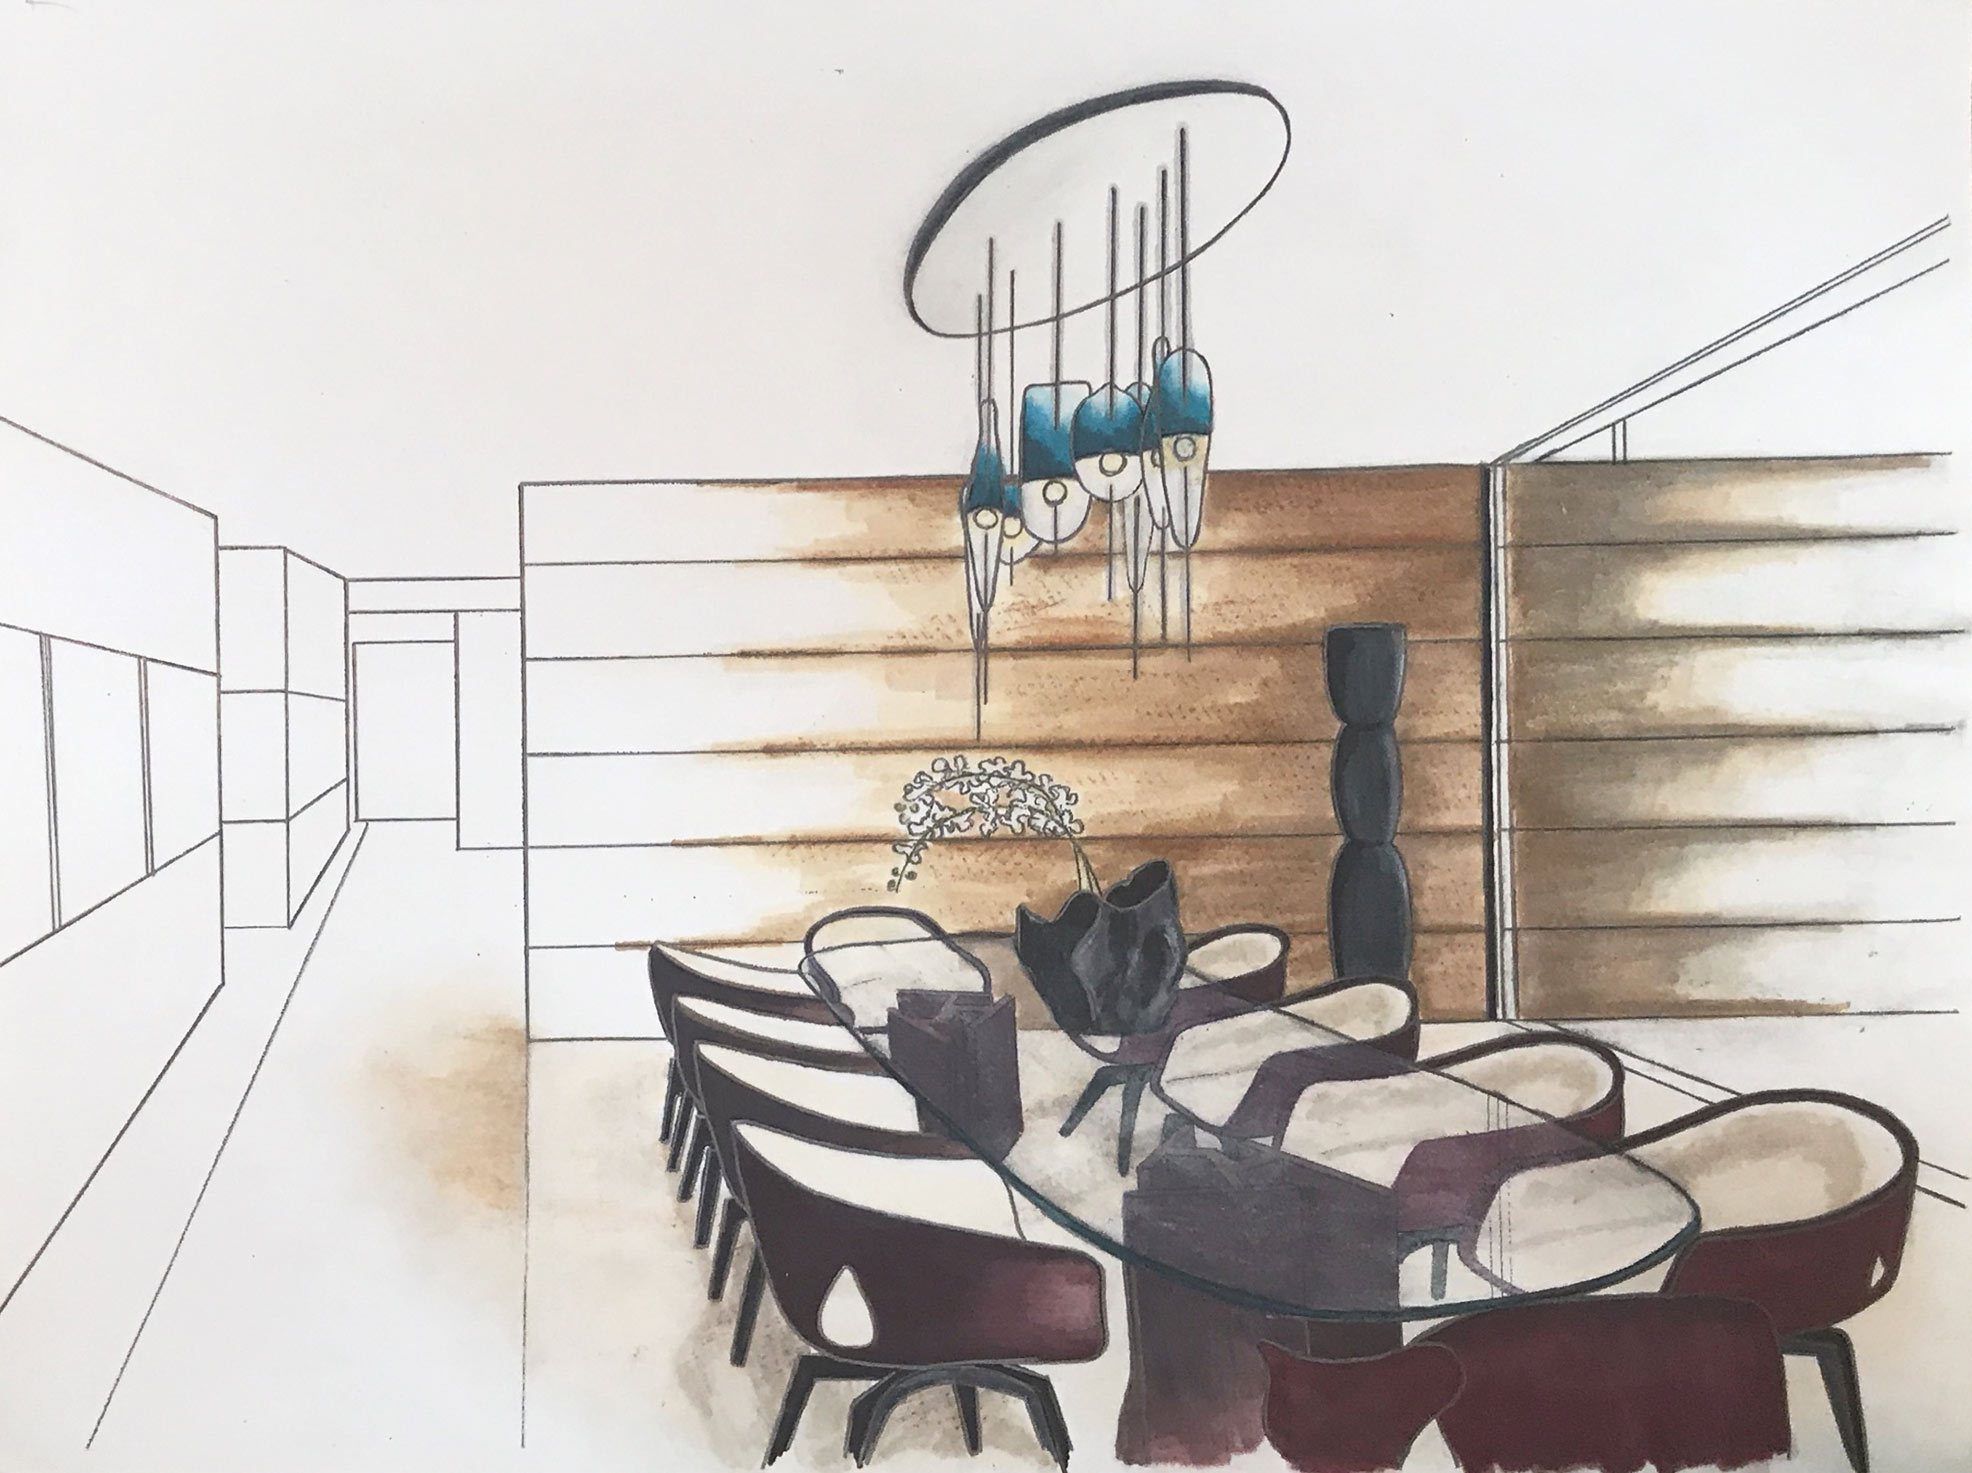 hand rendering shows glass table with chairs around it, teal light fixture